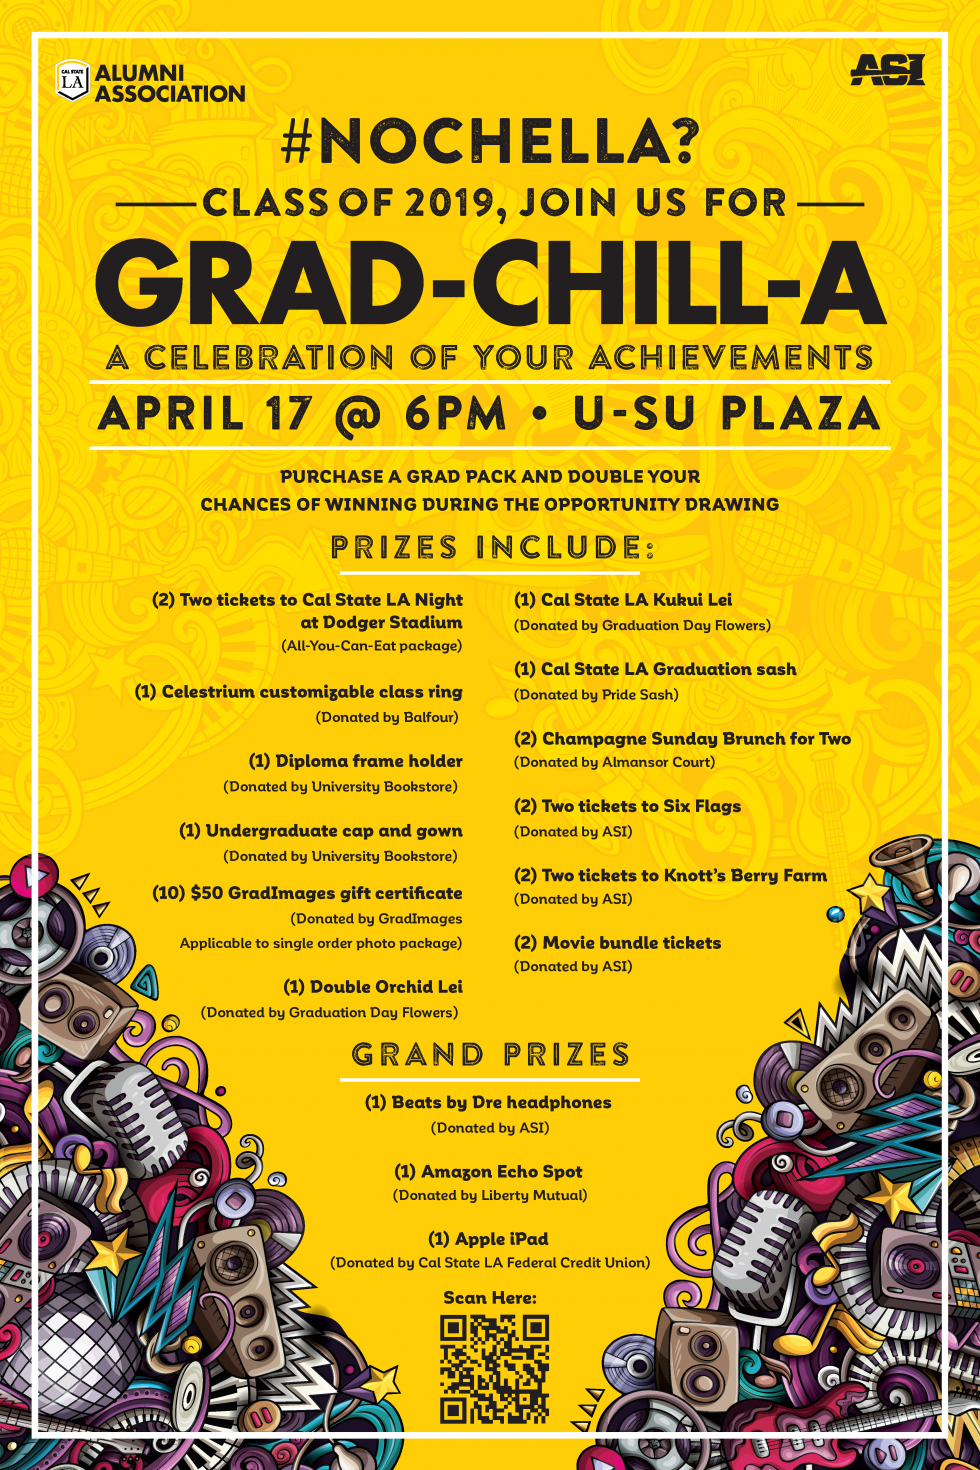 List of grad-chill-a prizes